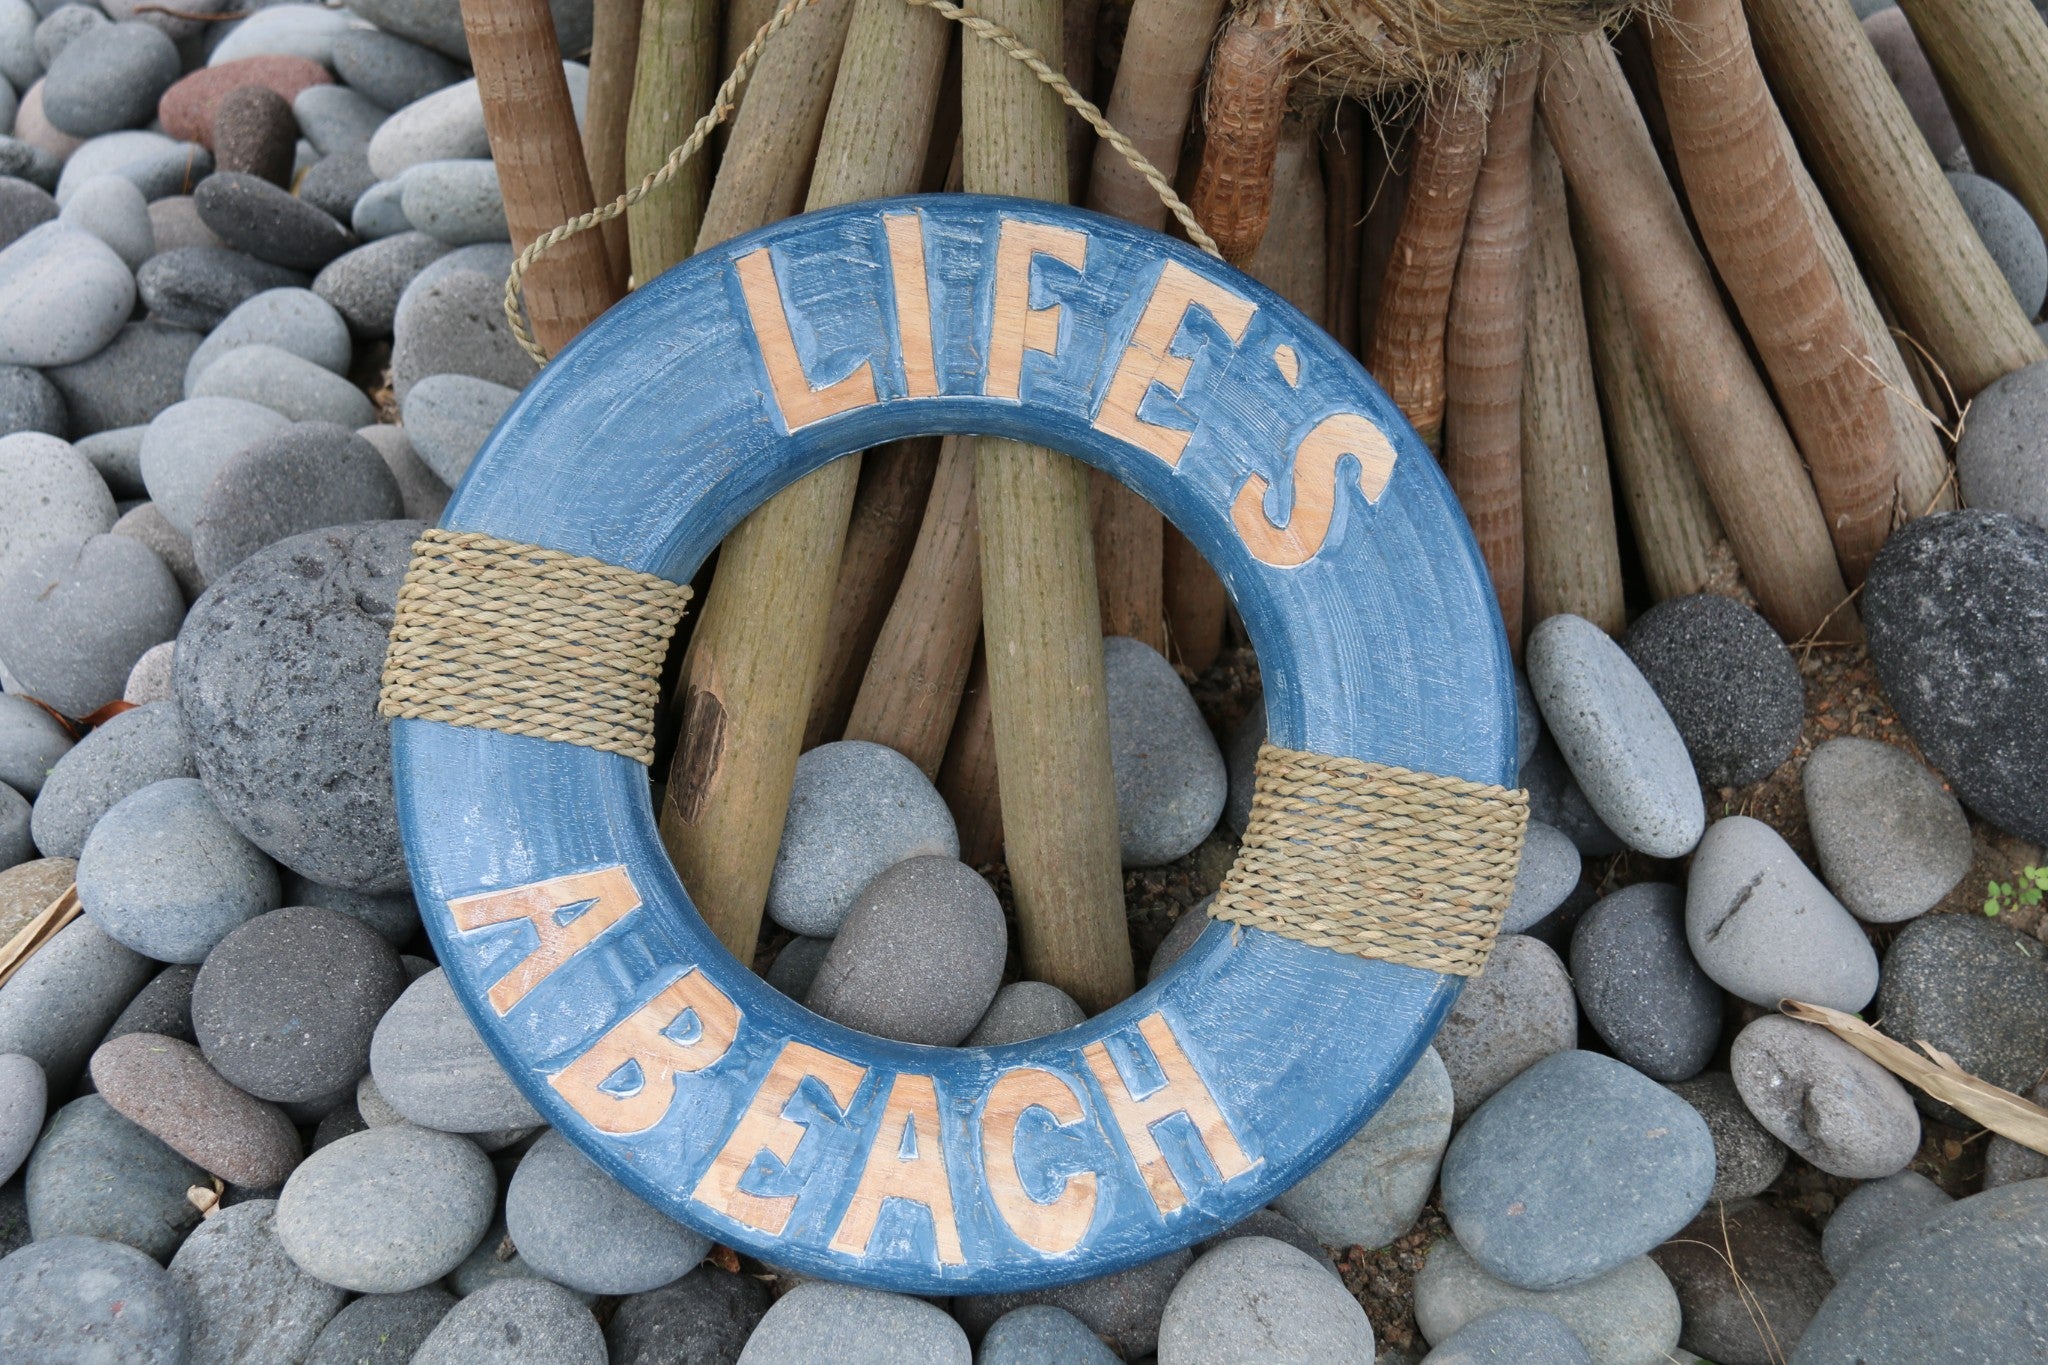 NEW Balinese Hand Crafted LIFE'S A BEACH Life Buoy Decor Sign - Blue